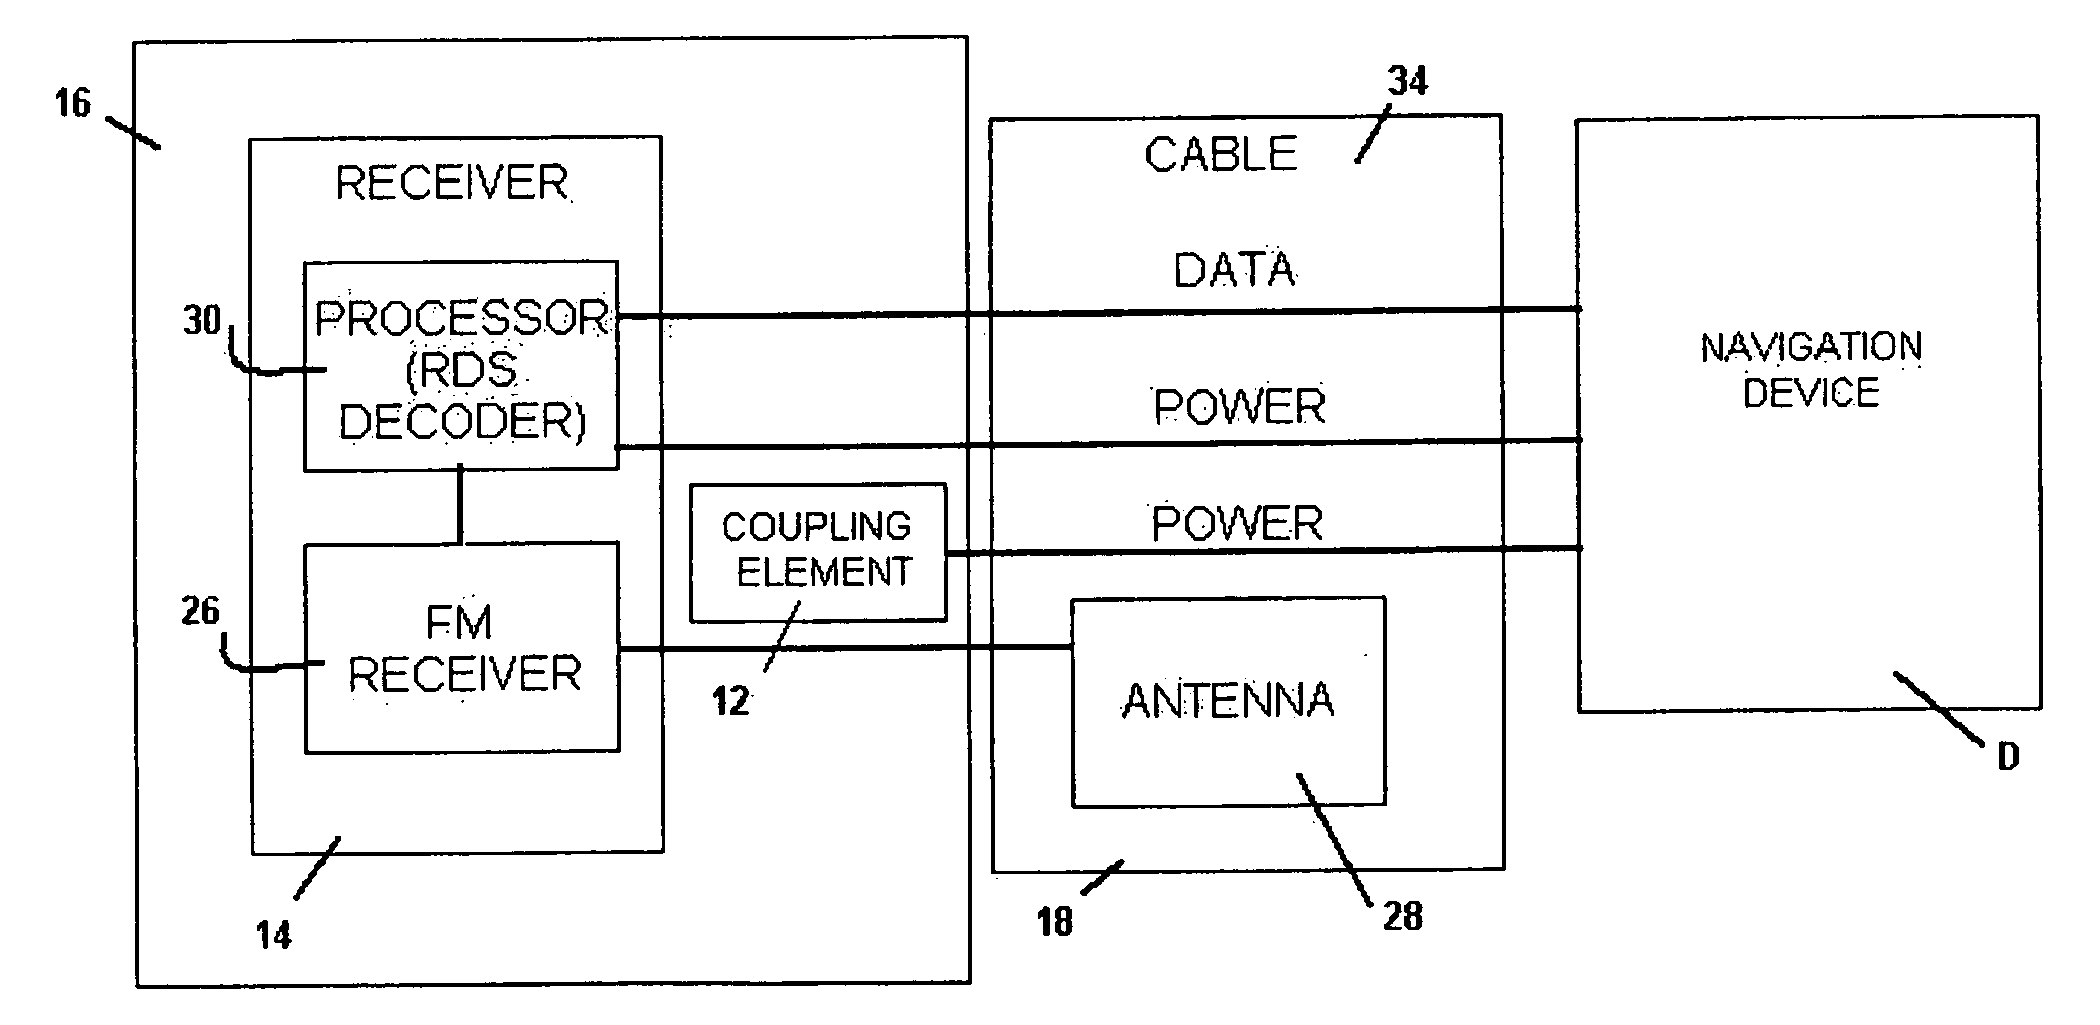 Integrated receiver and power adapter